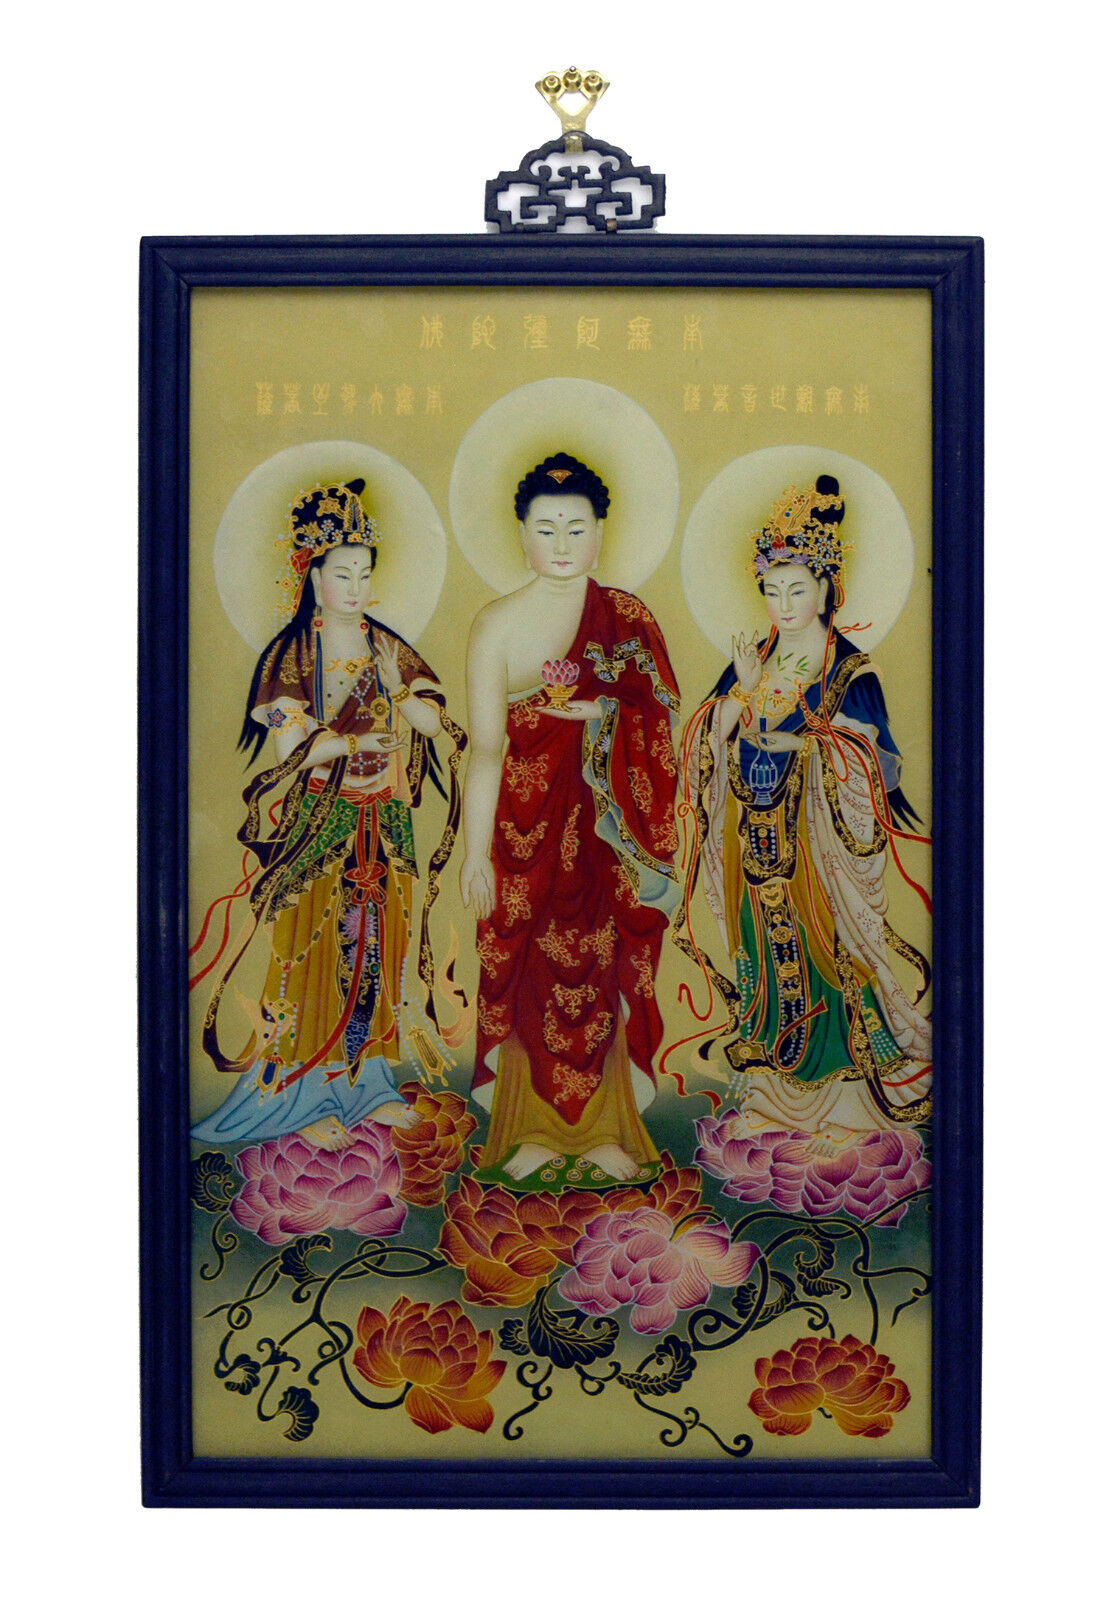 Superb Vintage Chinese Buddhist Reverse Glass Painting Wall Hanging Plaque